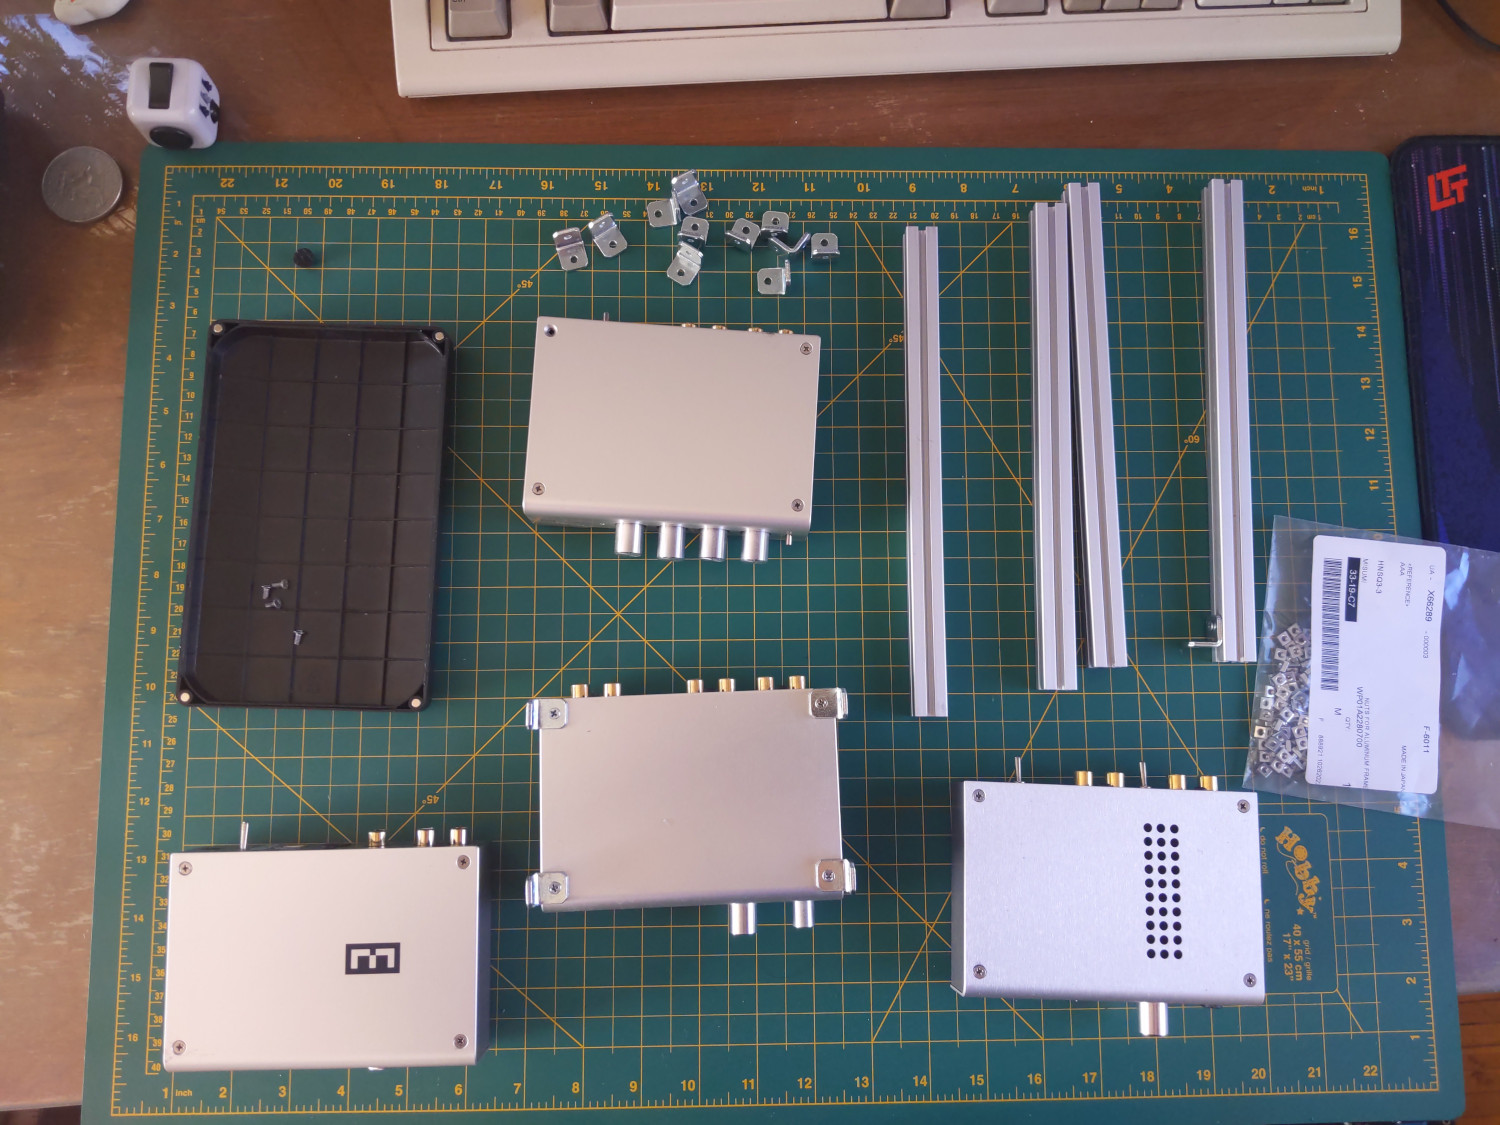 The 4 different Schiit devices with the hardware needed to build the extruded frame